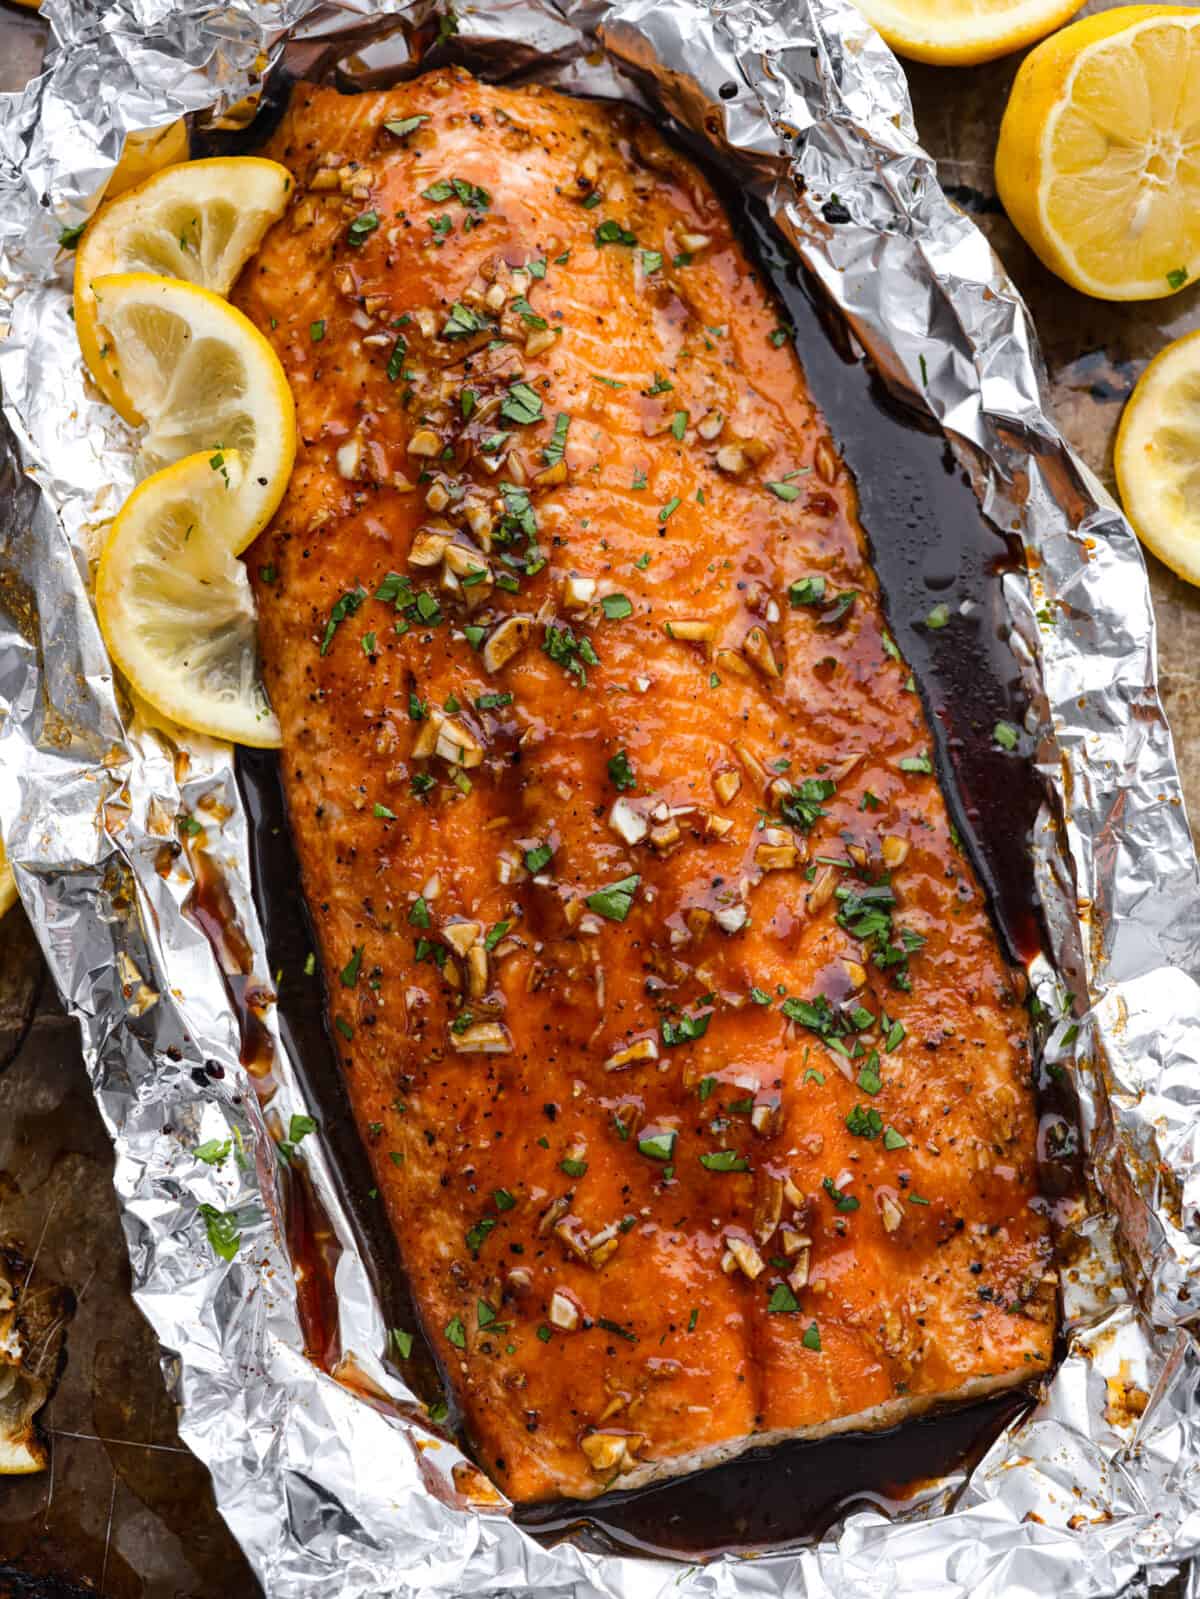 Salmon wrapped in foil and garnished with lemon slices.